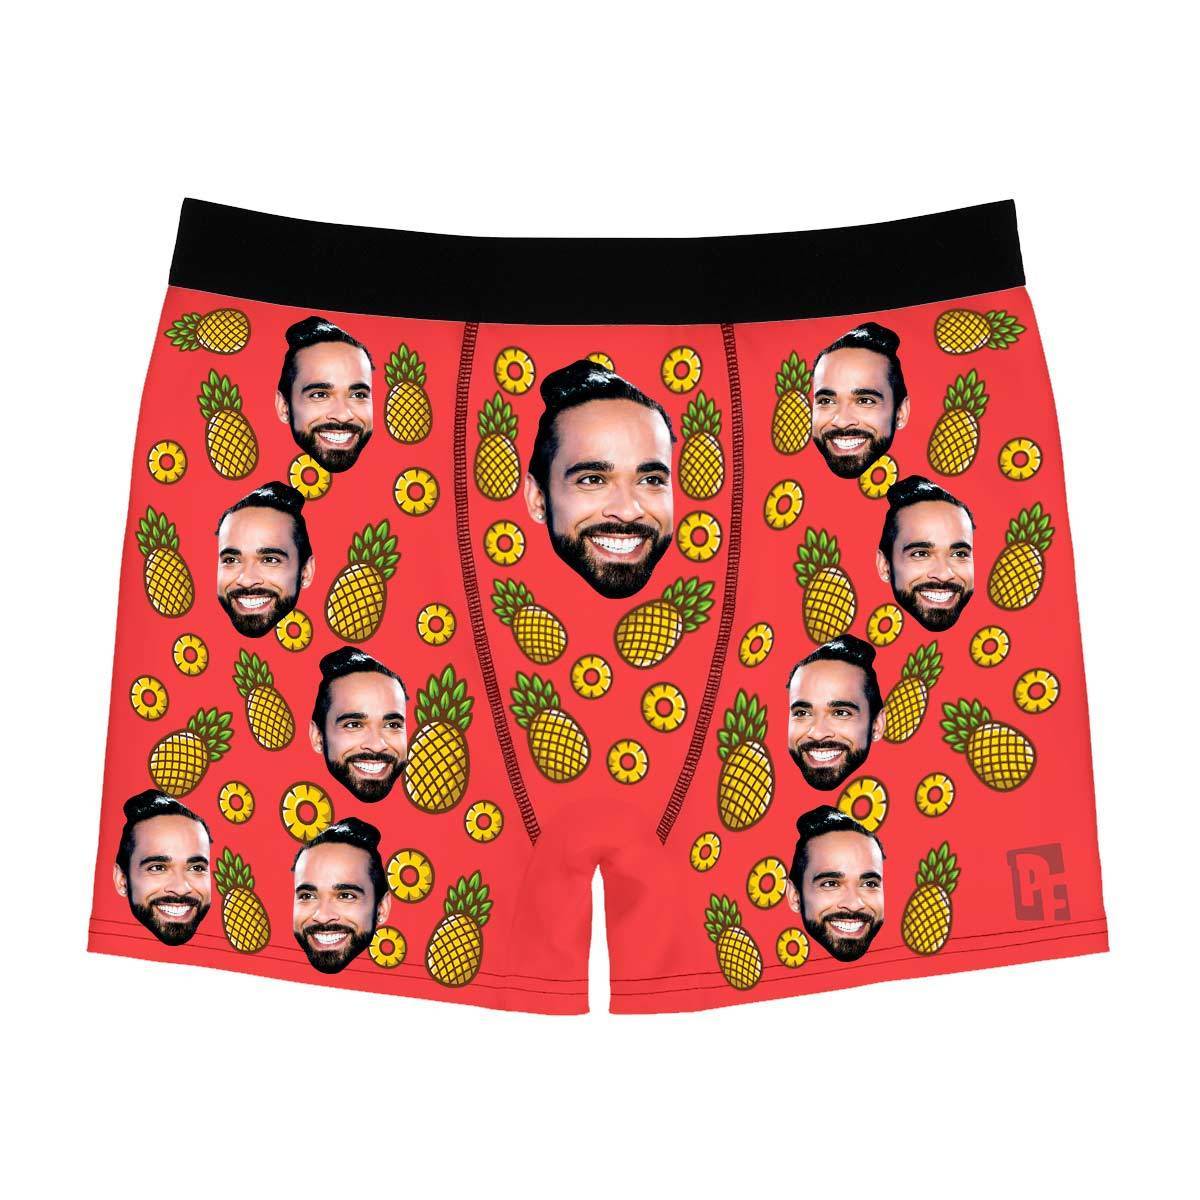 Red Fruits men's boxer briefs personalized with photo printed on them